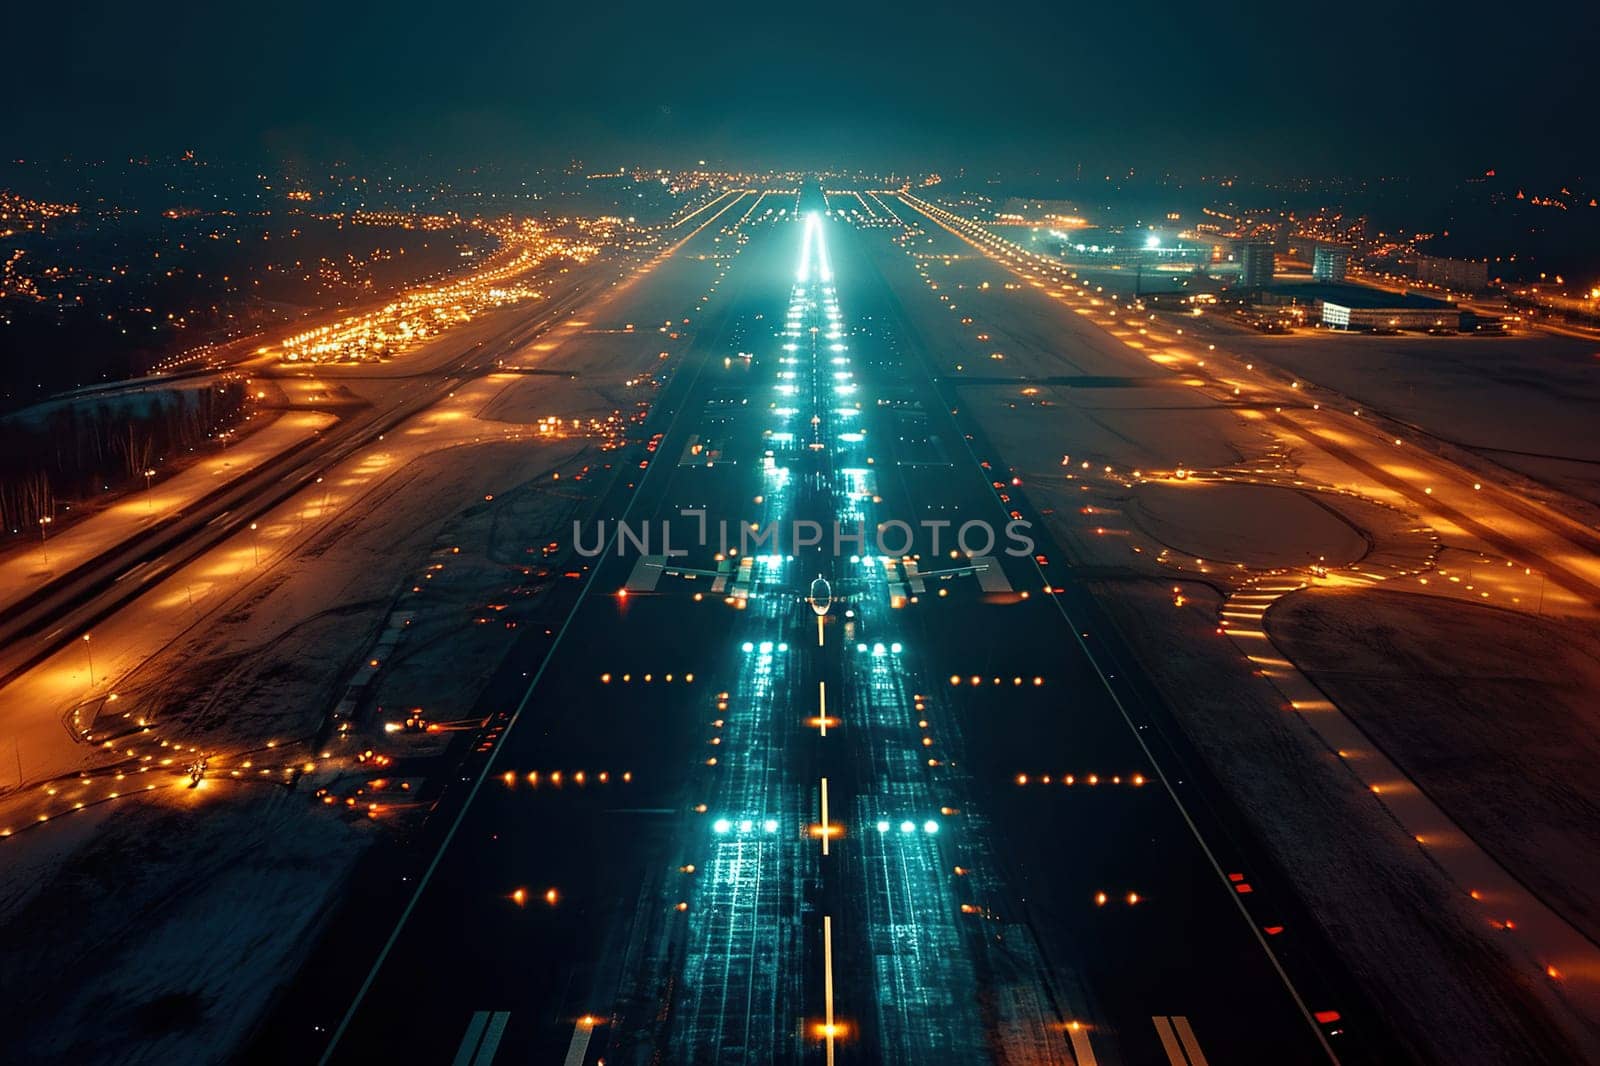 Beautiful top view of the airport runways at night.